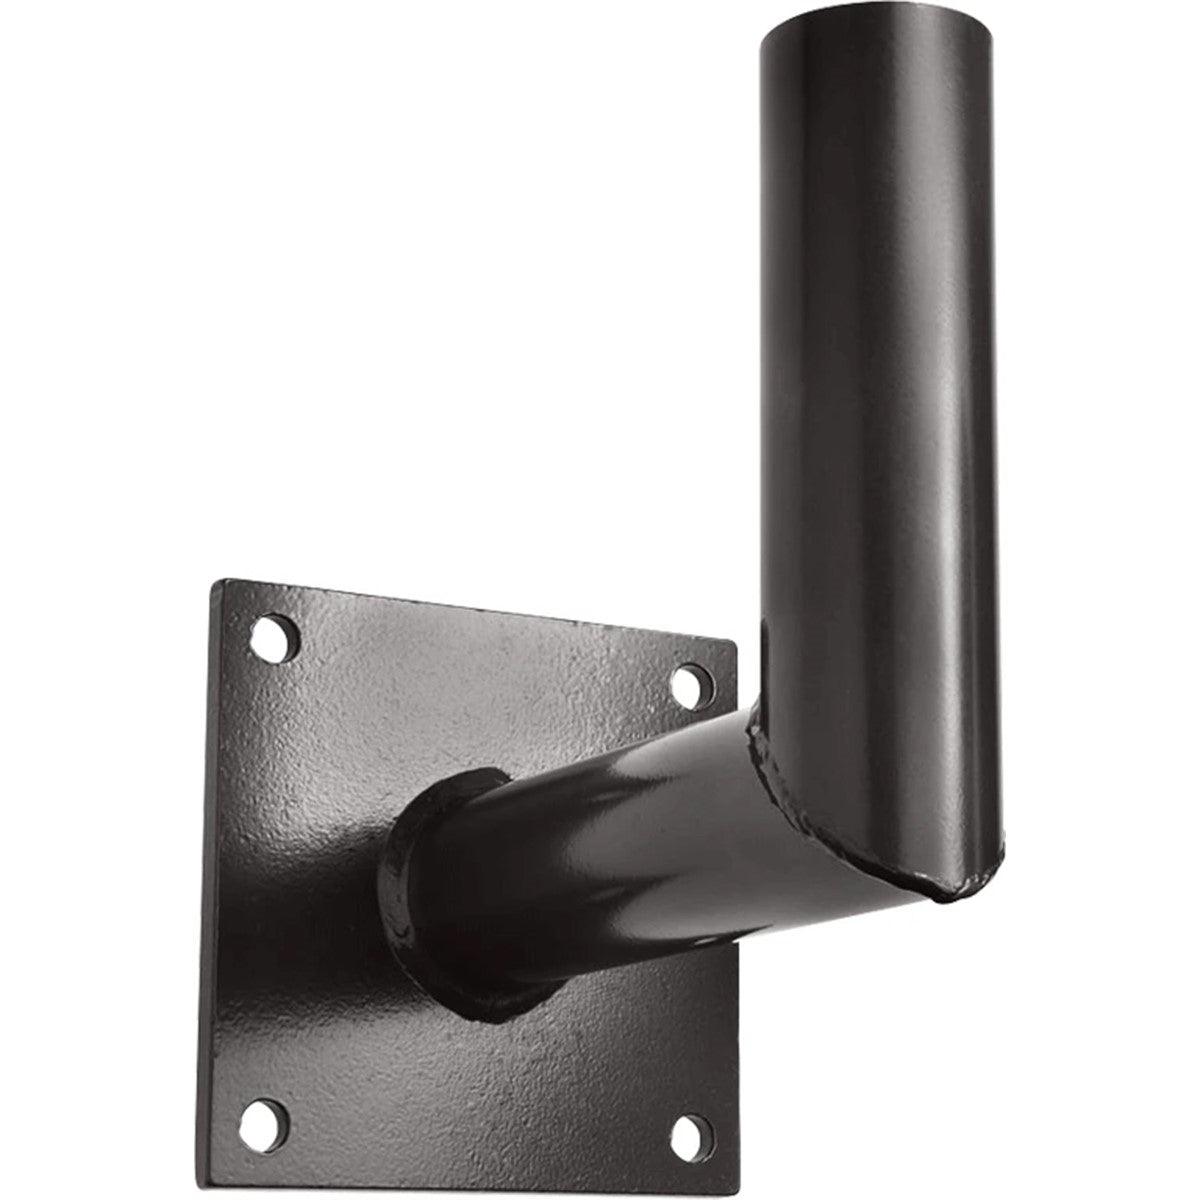 RAB Lighting MAB Poles Bracket Right Angle Wall Mount 8 1/2 Inch X 8 Inches, Bronze Finish